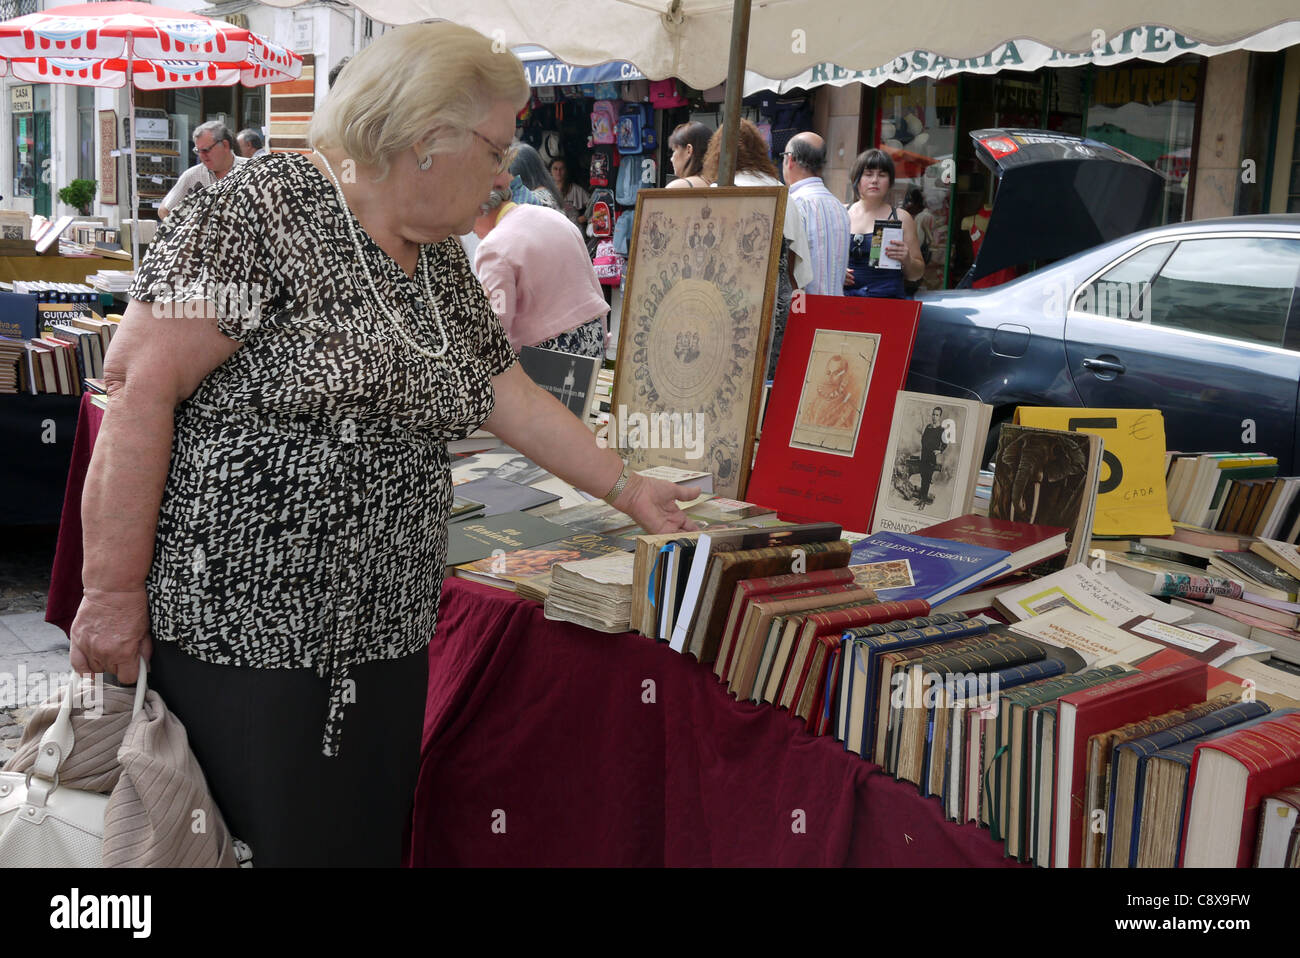 A woman inspecting books at a flea market, held on the last Saturday of the month, in Praça do Comércio, Coimbra, Portugal. Stock Photo